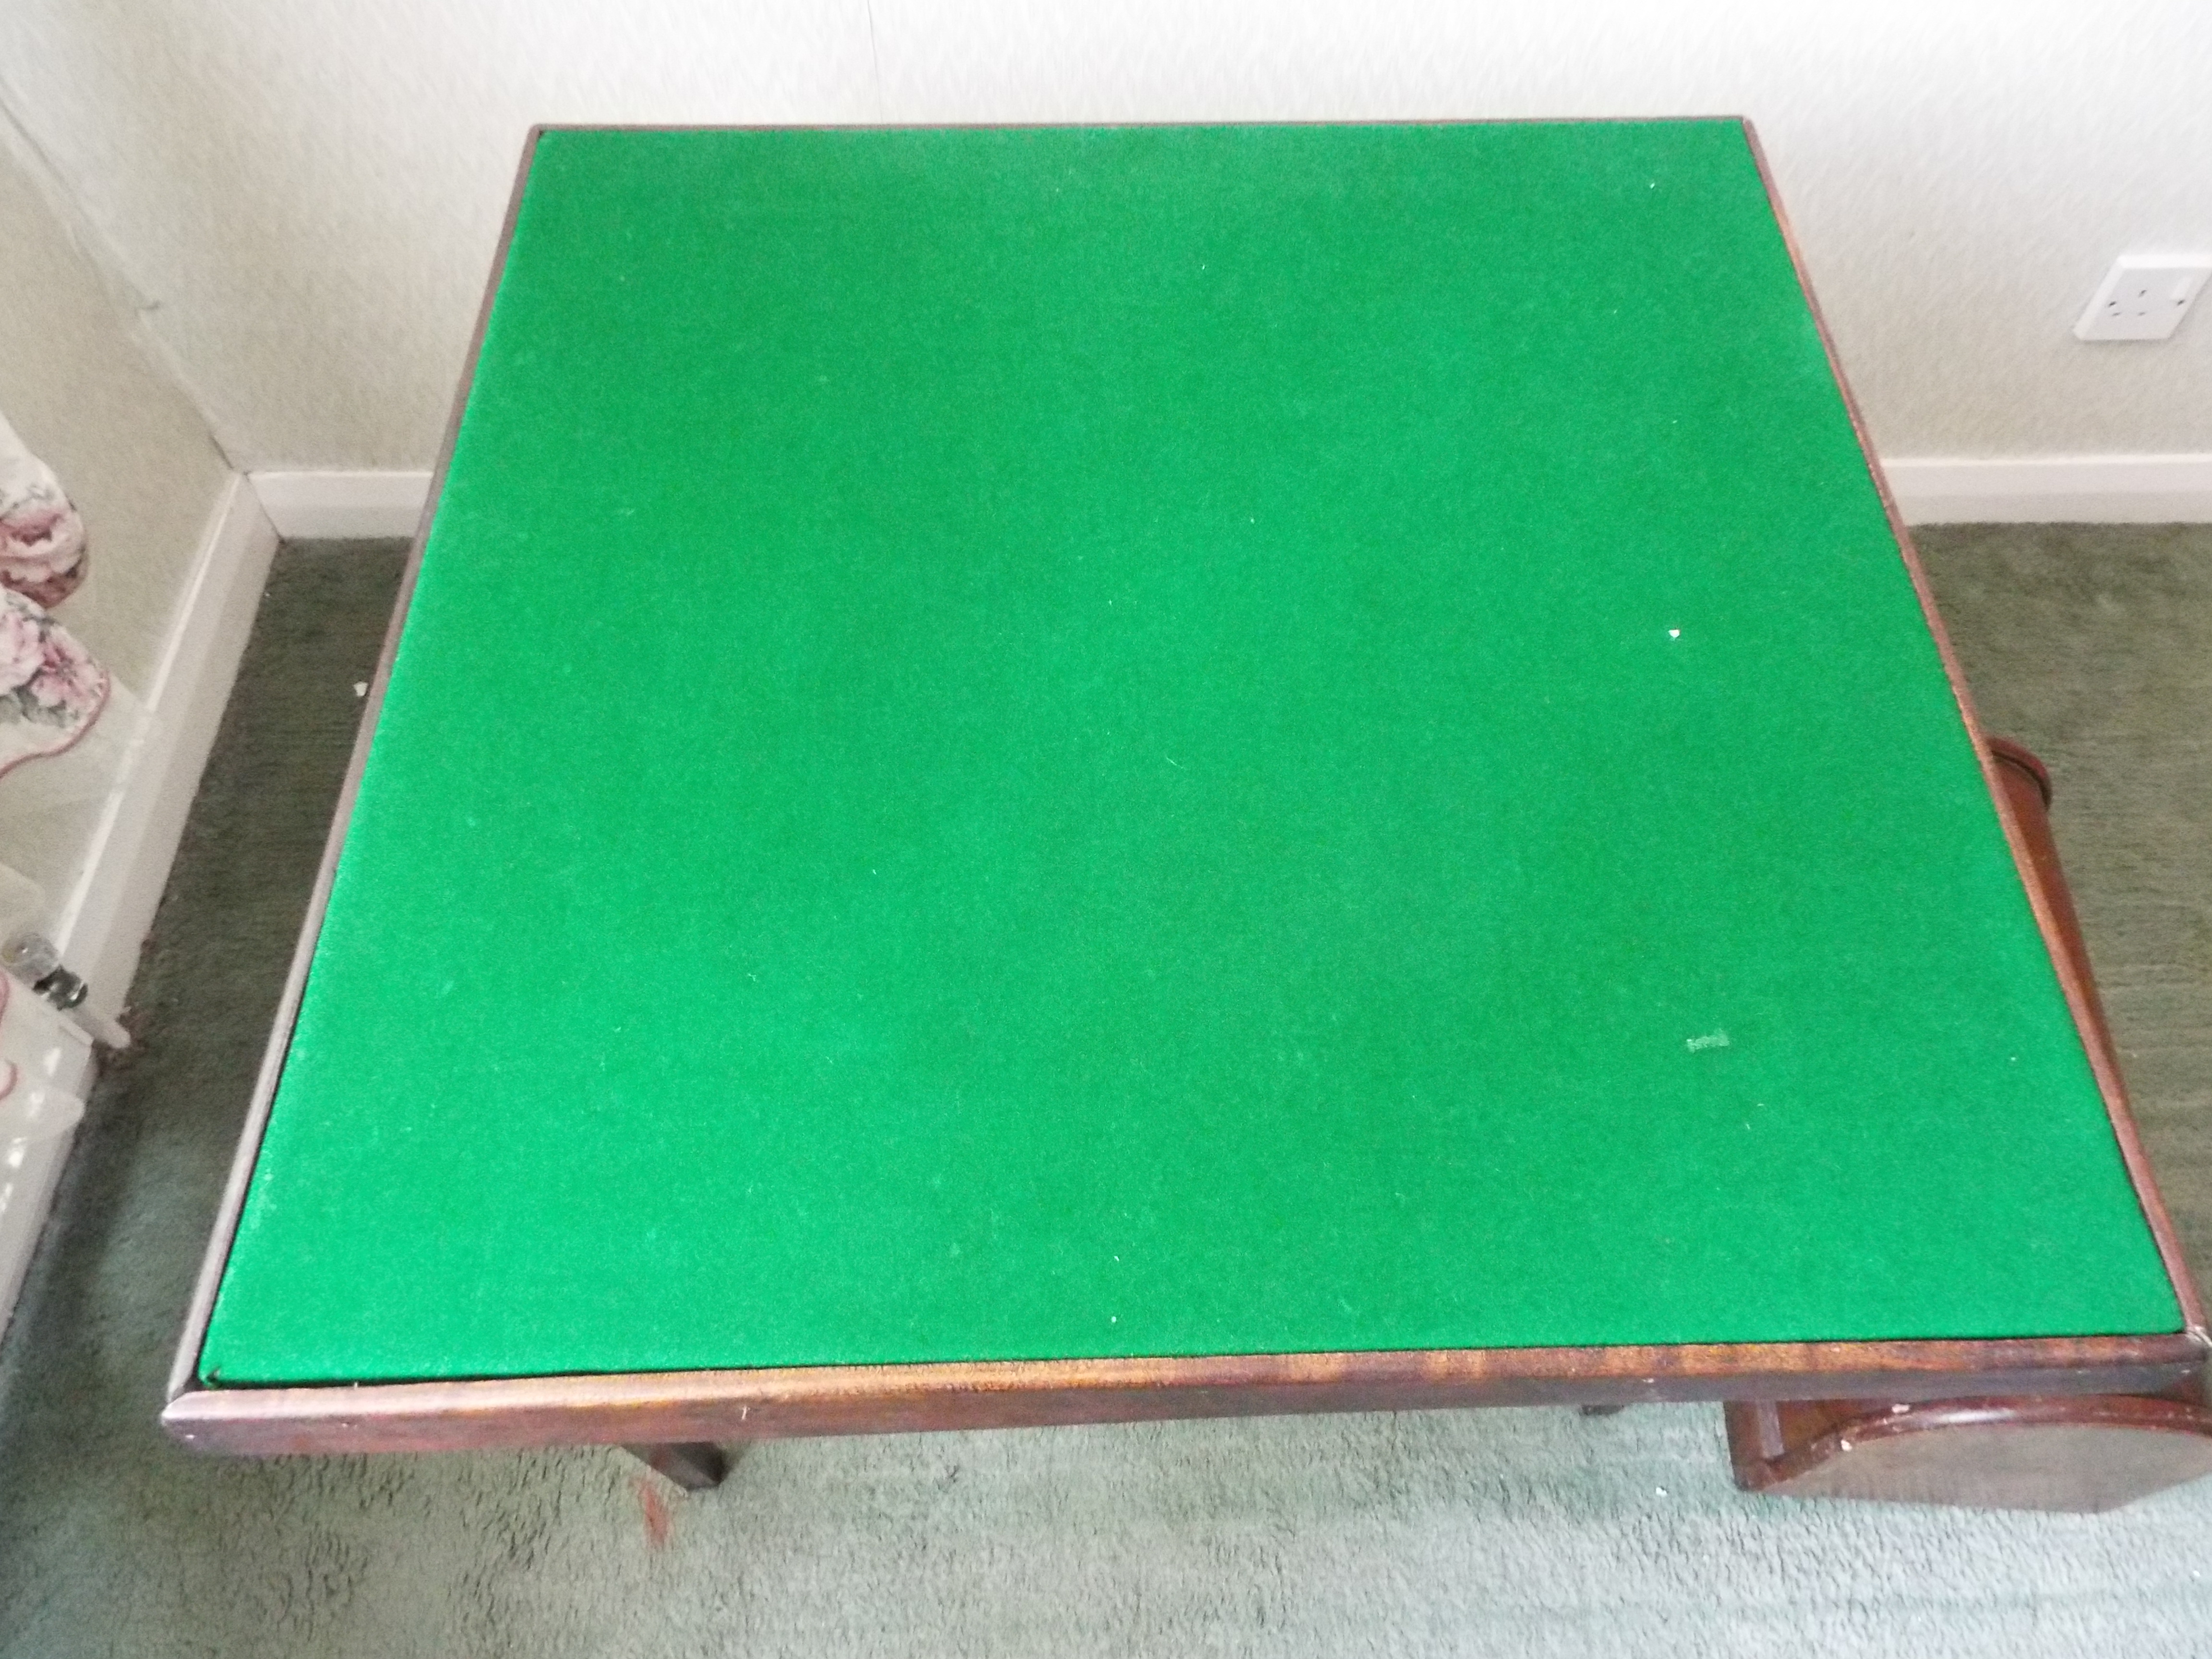 A folding card table with green felt top, approximately 64 cm x 70 cm x 70 cm.